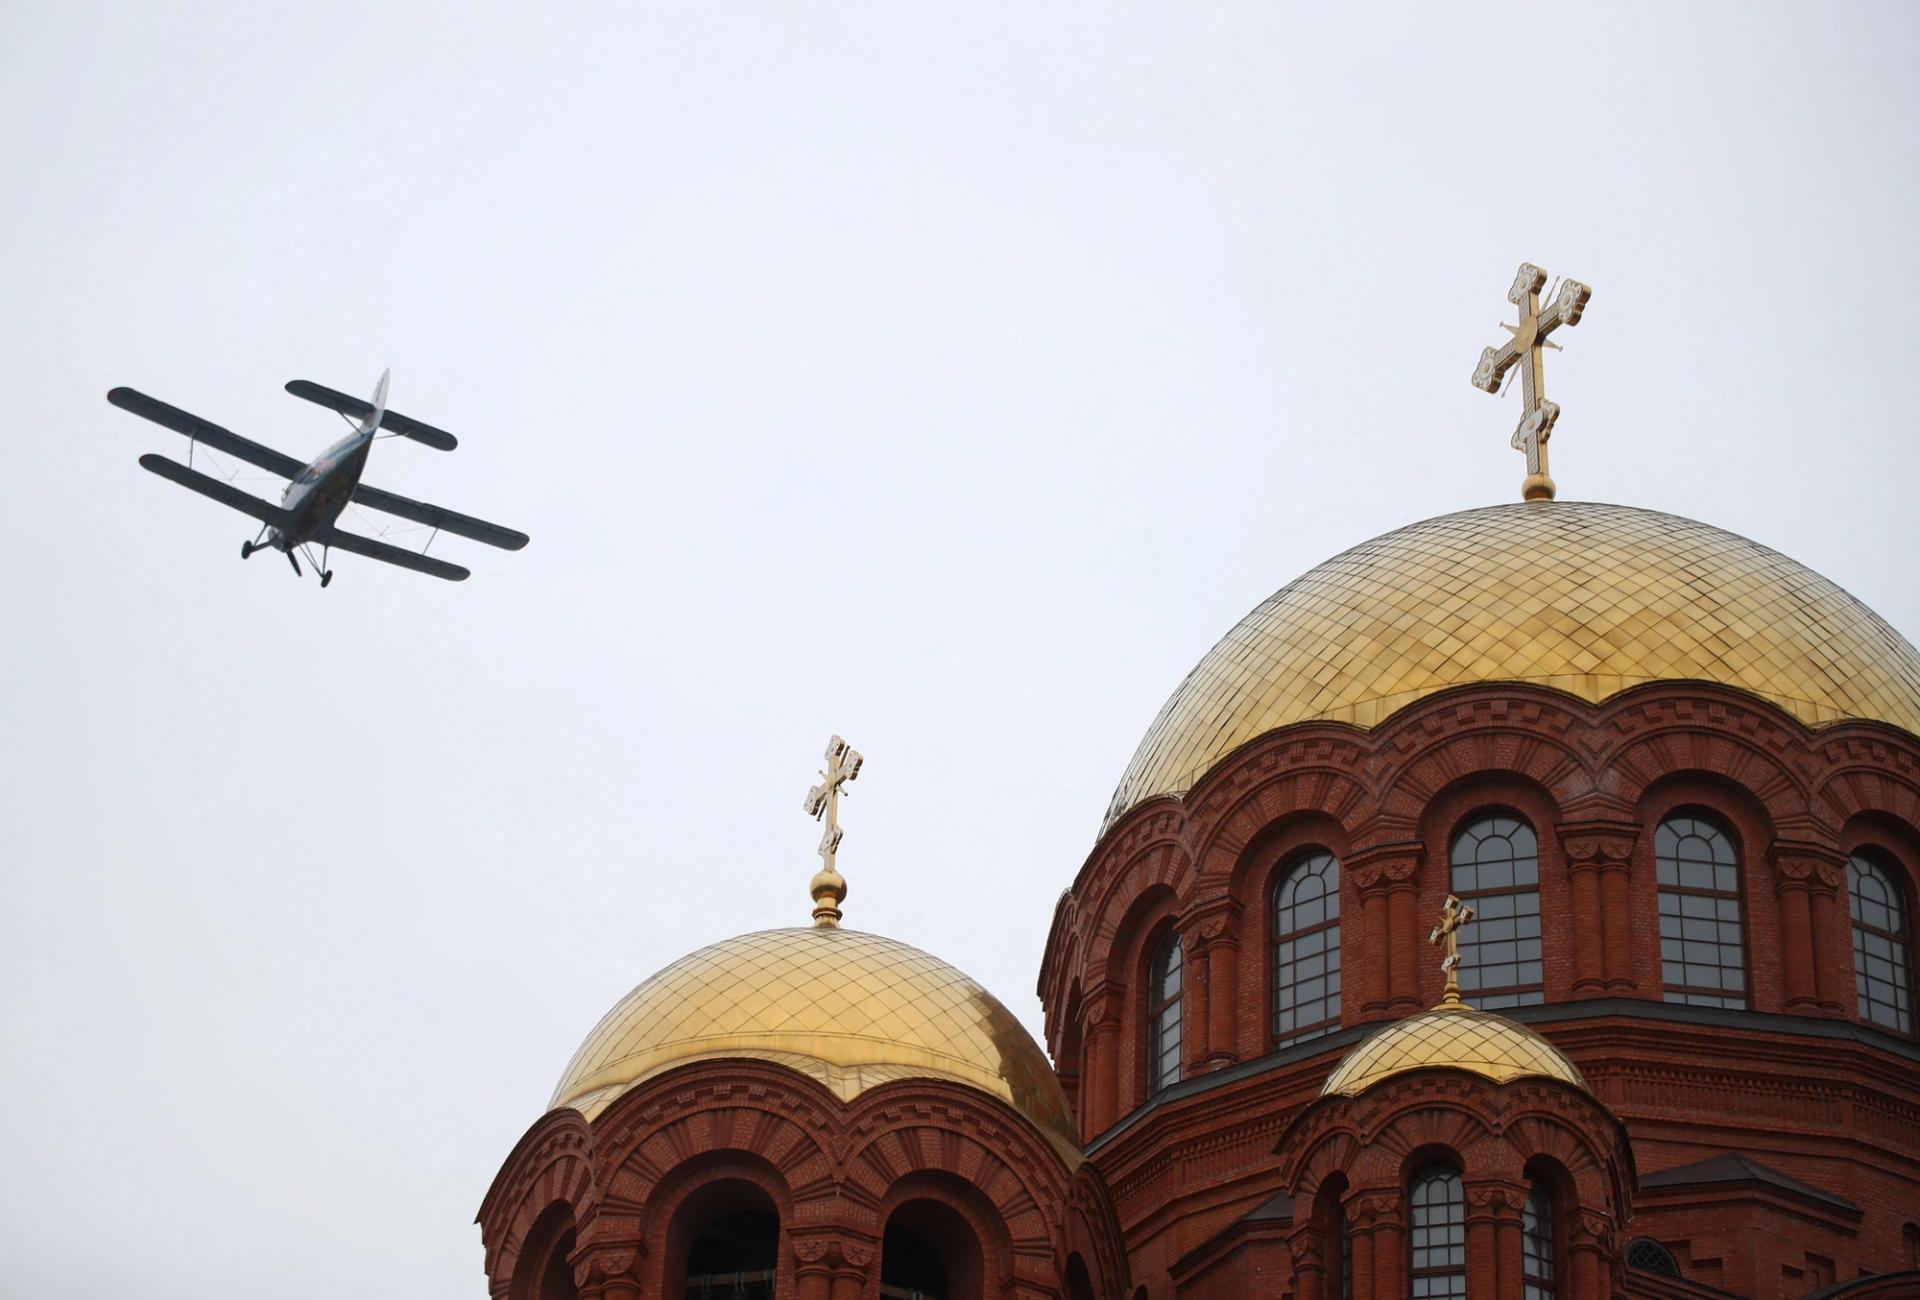 A plane flies over the Cathedral of Alexander Nevsky during a military parade marking the 80th anniversary of the victory of Red Army over Nazi Germany's troops in the Battle of Stalingrad during World War Two, in Volgograd